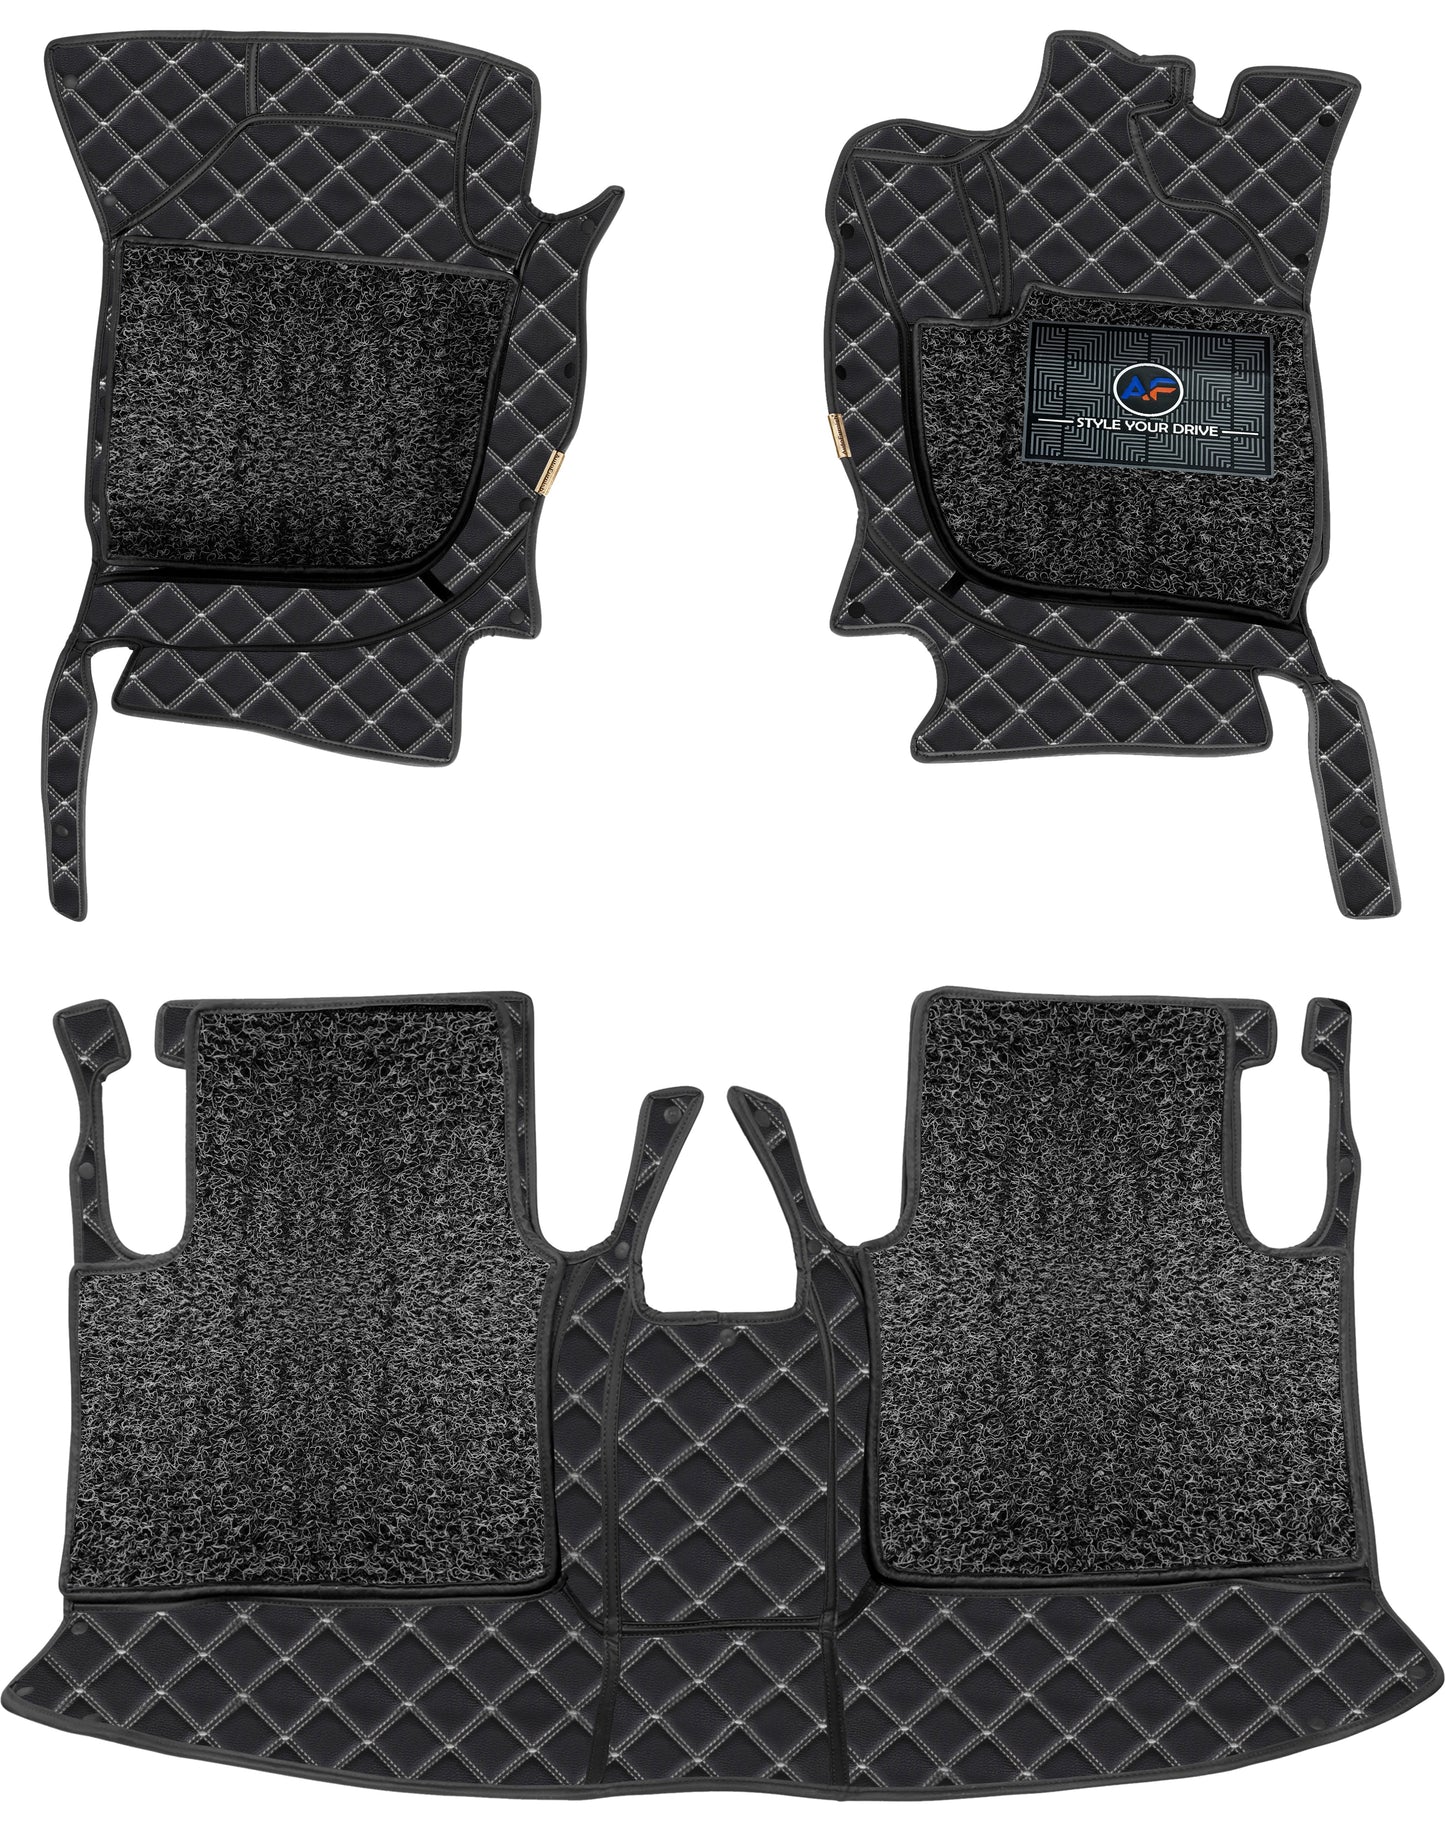 mercedes-c220-2014-19-7d-luxury-car-mat-all-weather-proof-anti-skid-100-waterproof-odorless-with-unique-diamond-fish-design-24mm-luxury-pu-leather-2-rows